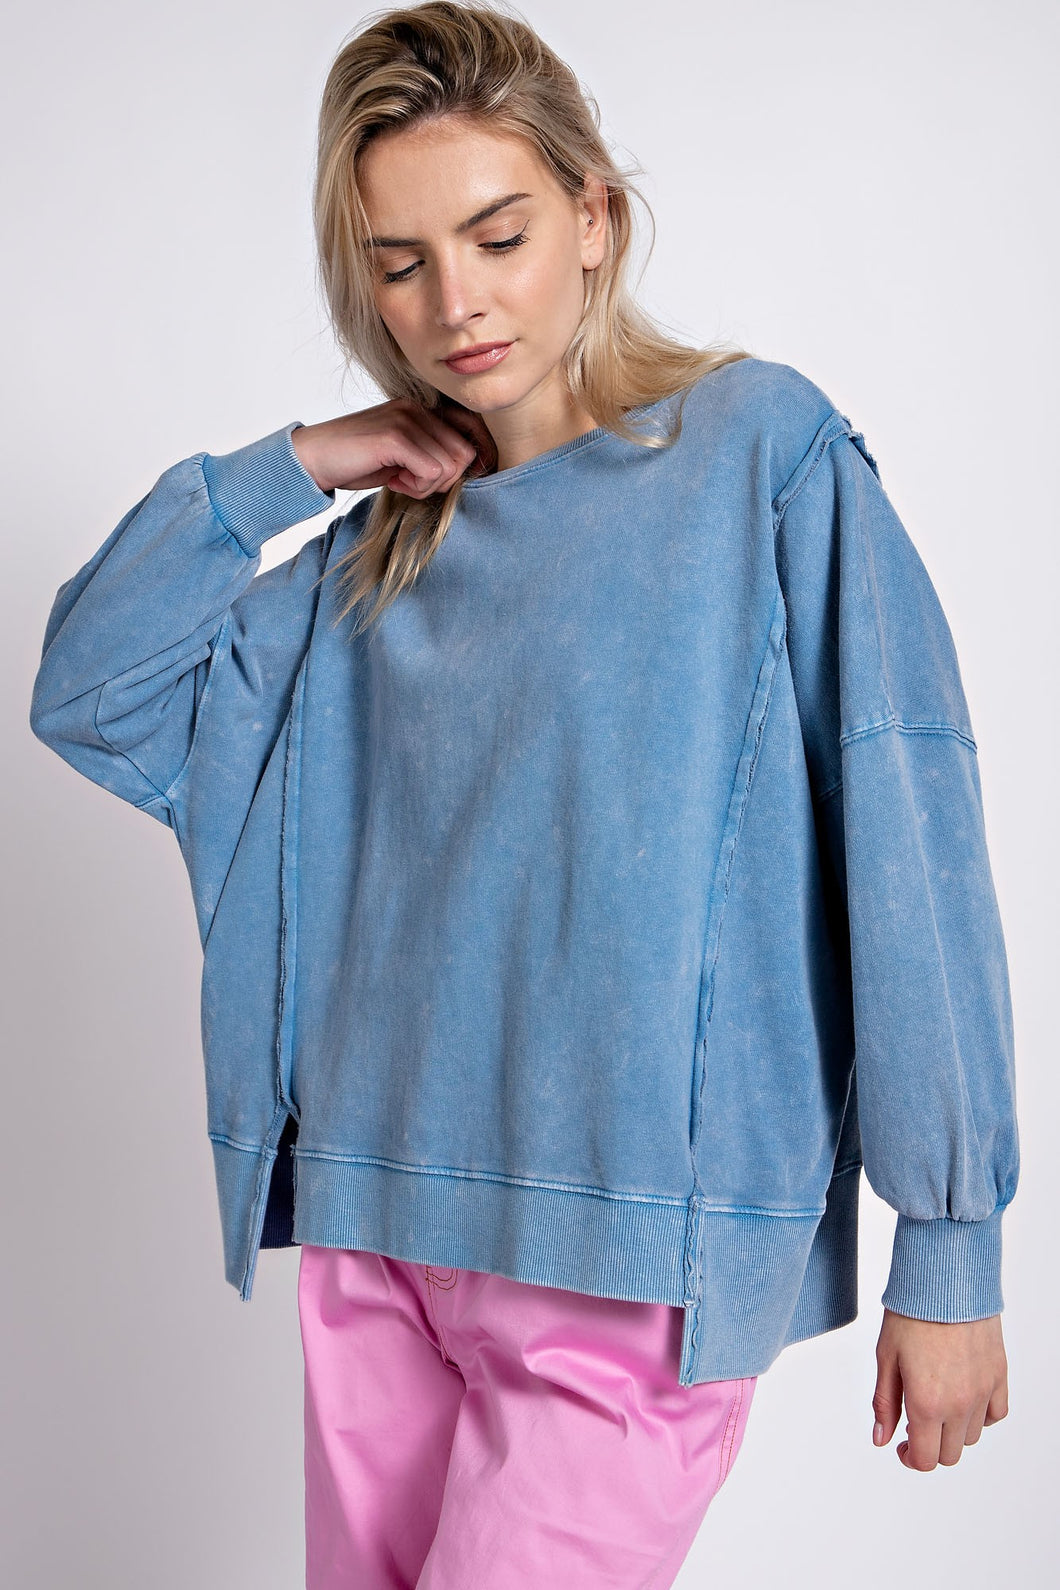 Easel Mineral Washed Pullover Top in Washed Blue Shirts & Tops Easel   